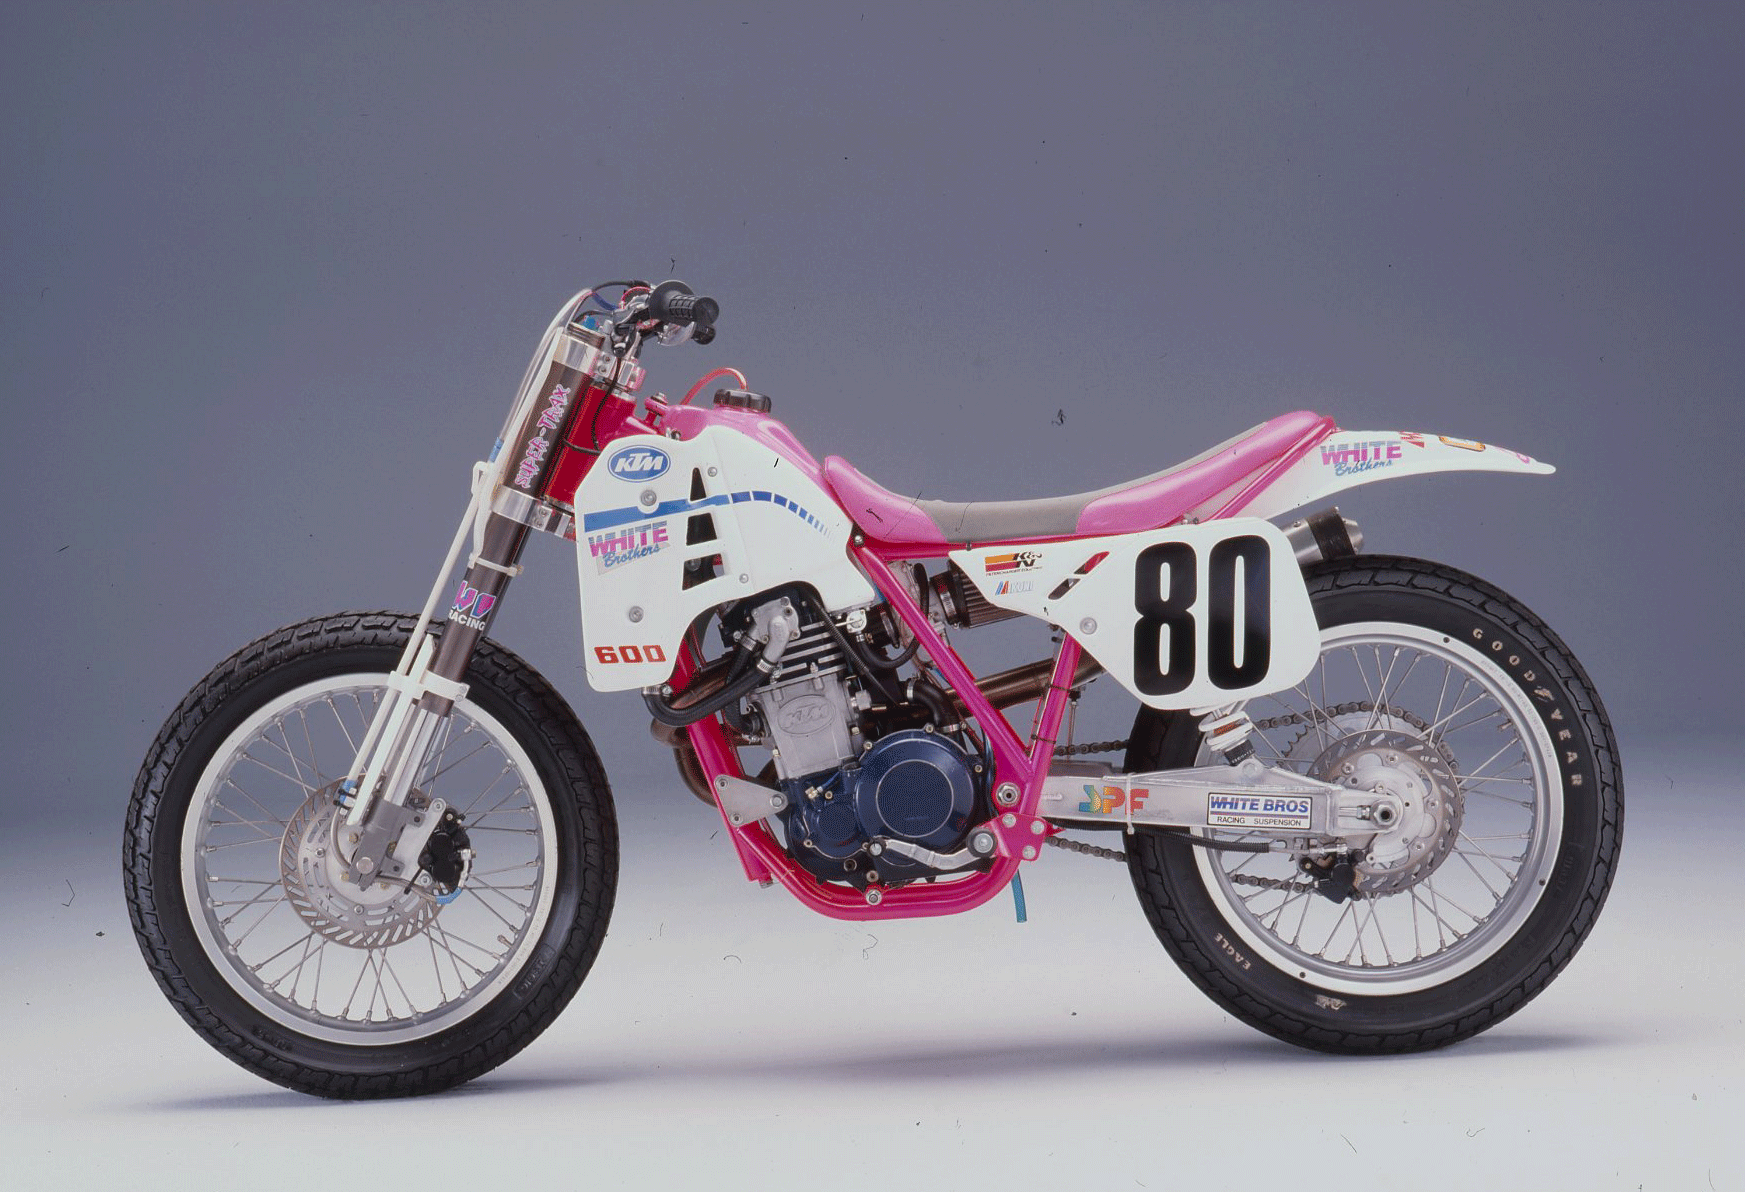 First, a KTM-powered dirt-tracker that has a “color that, whether you liked it or not, you saw it.”